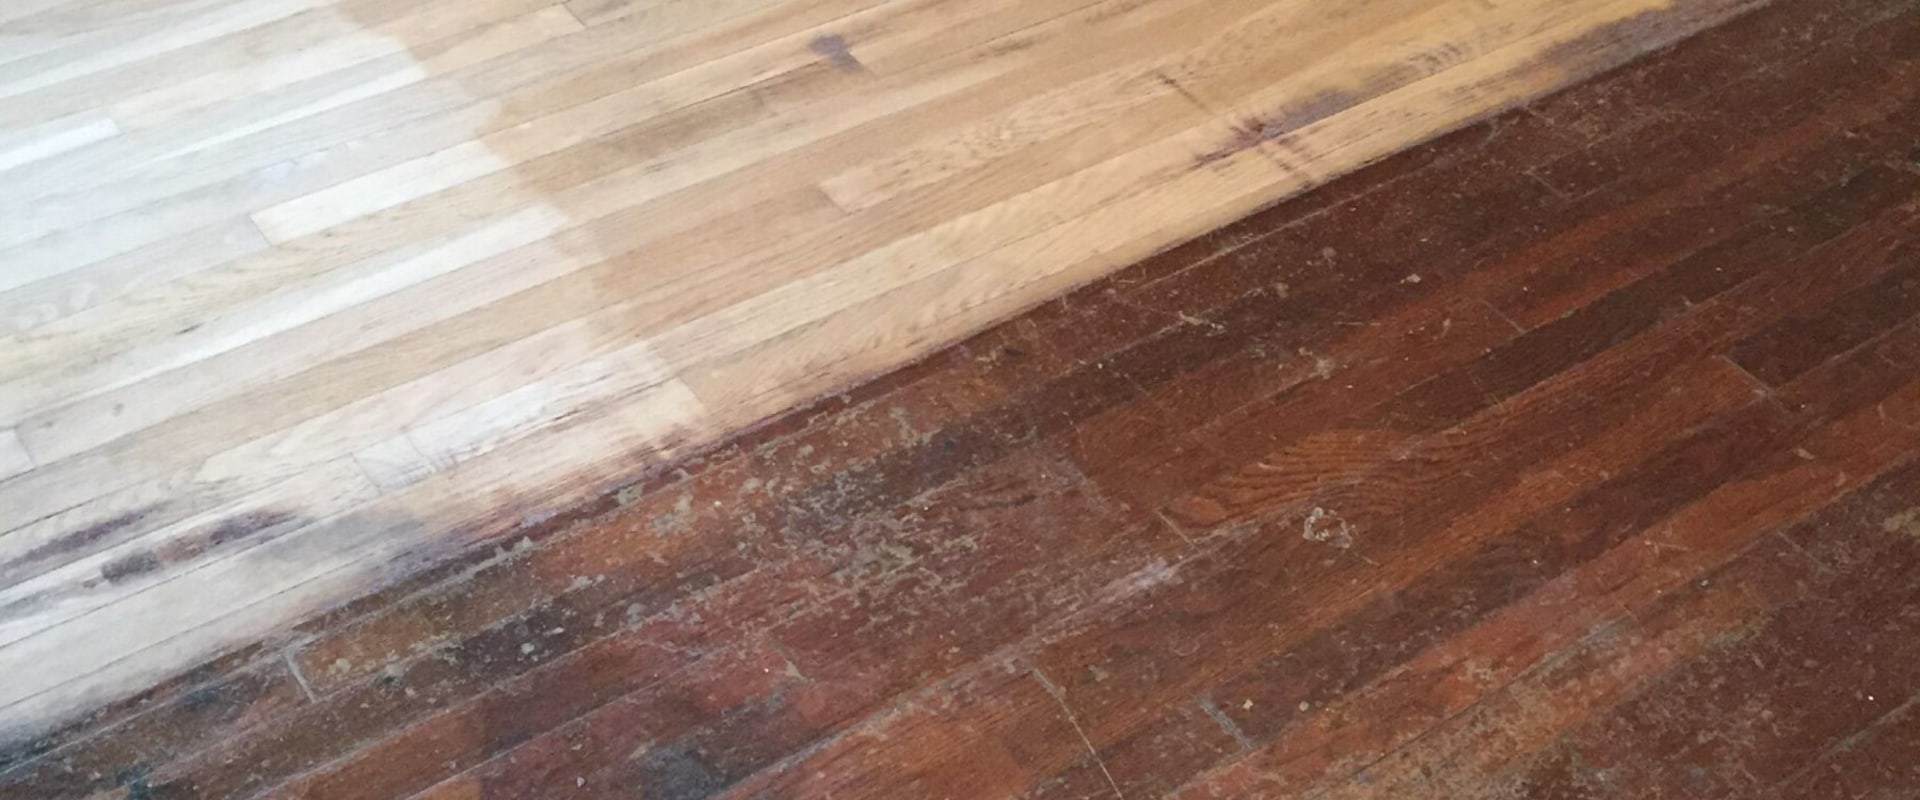 Where do hardwood floors come from?